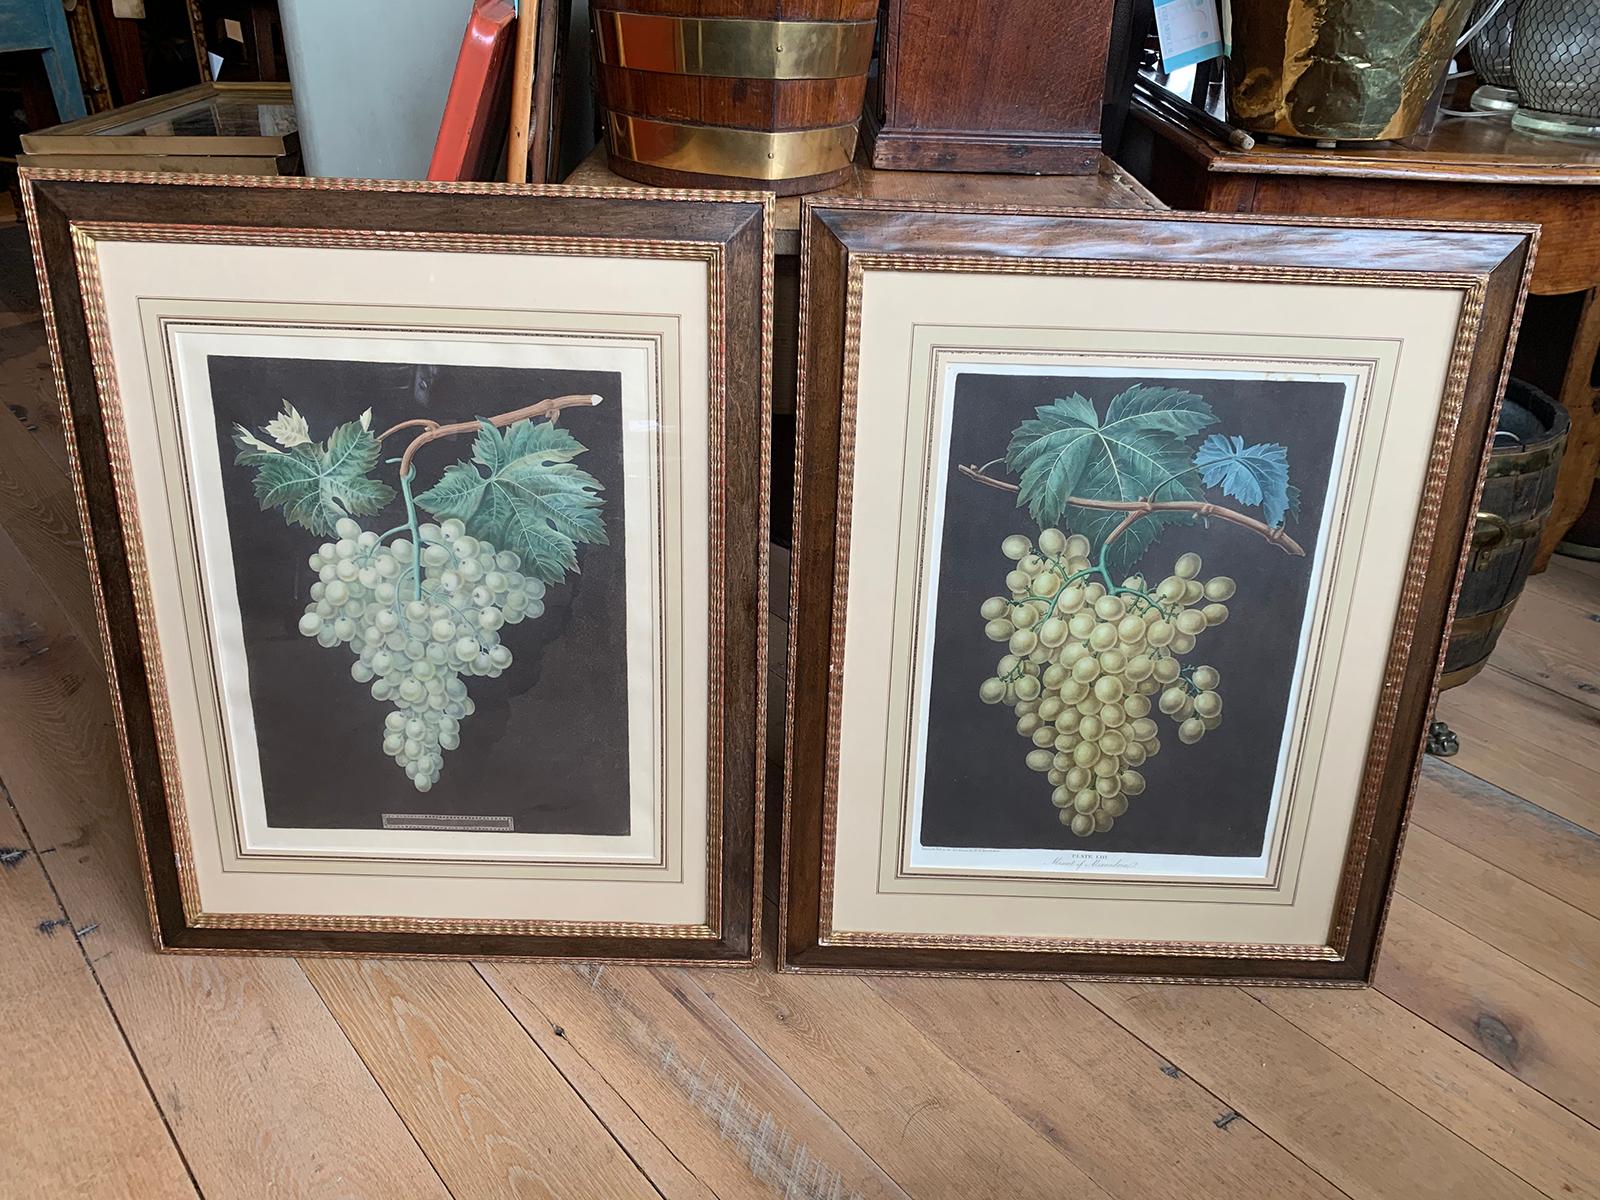 Pair of early 19th century circa 1812 English hand colored aquatint engravings of grapes by George Brookshaw
from 